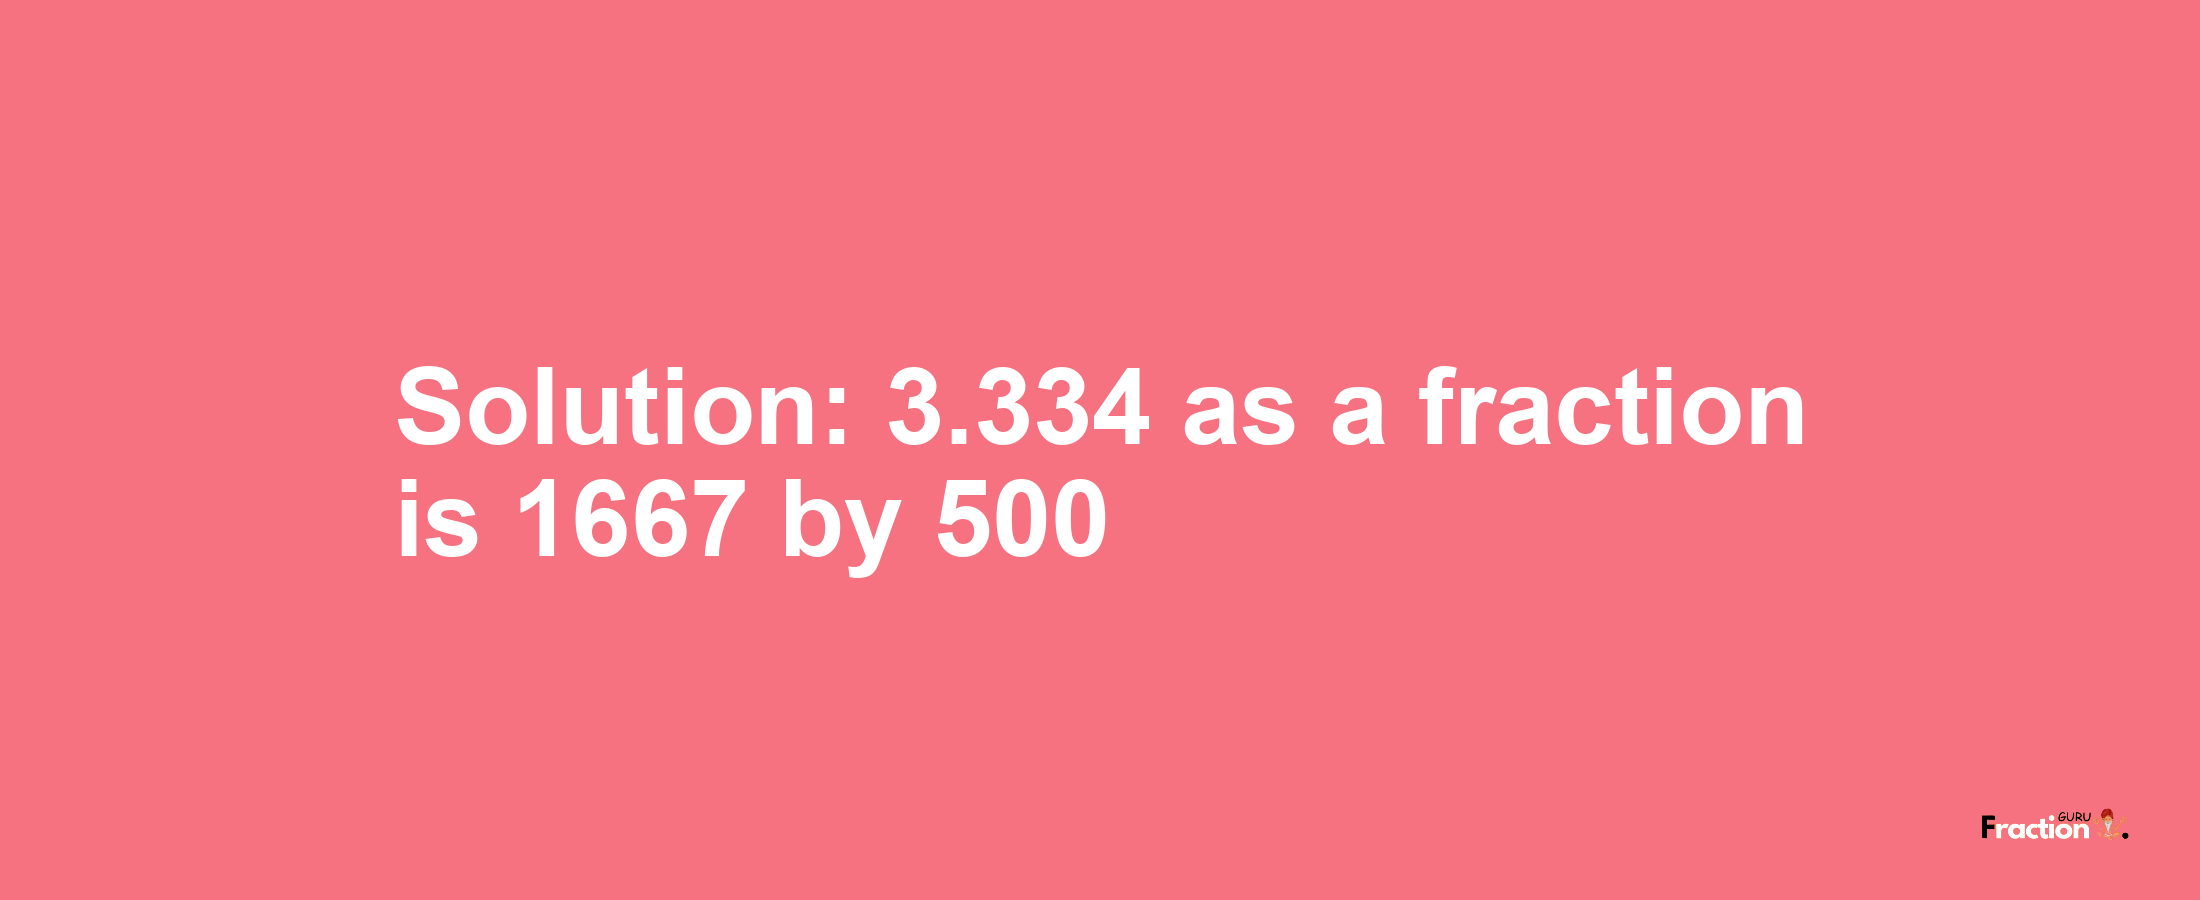 Solution:3.334 as a fraction is 1667/500